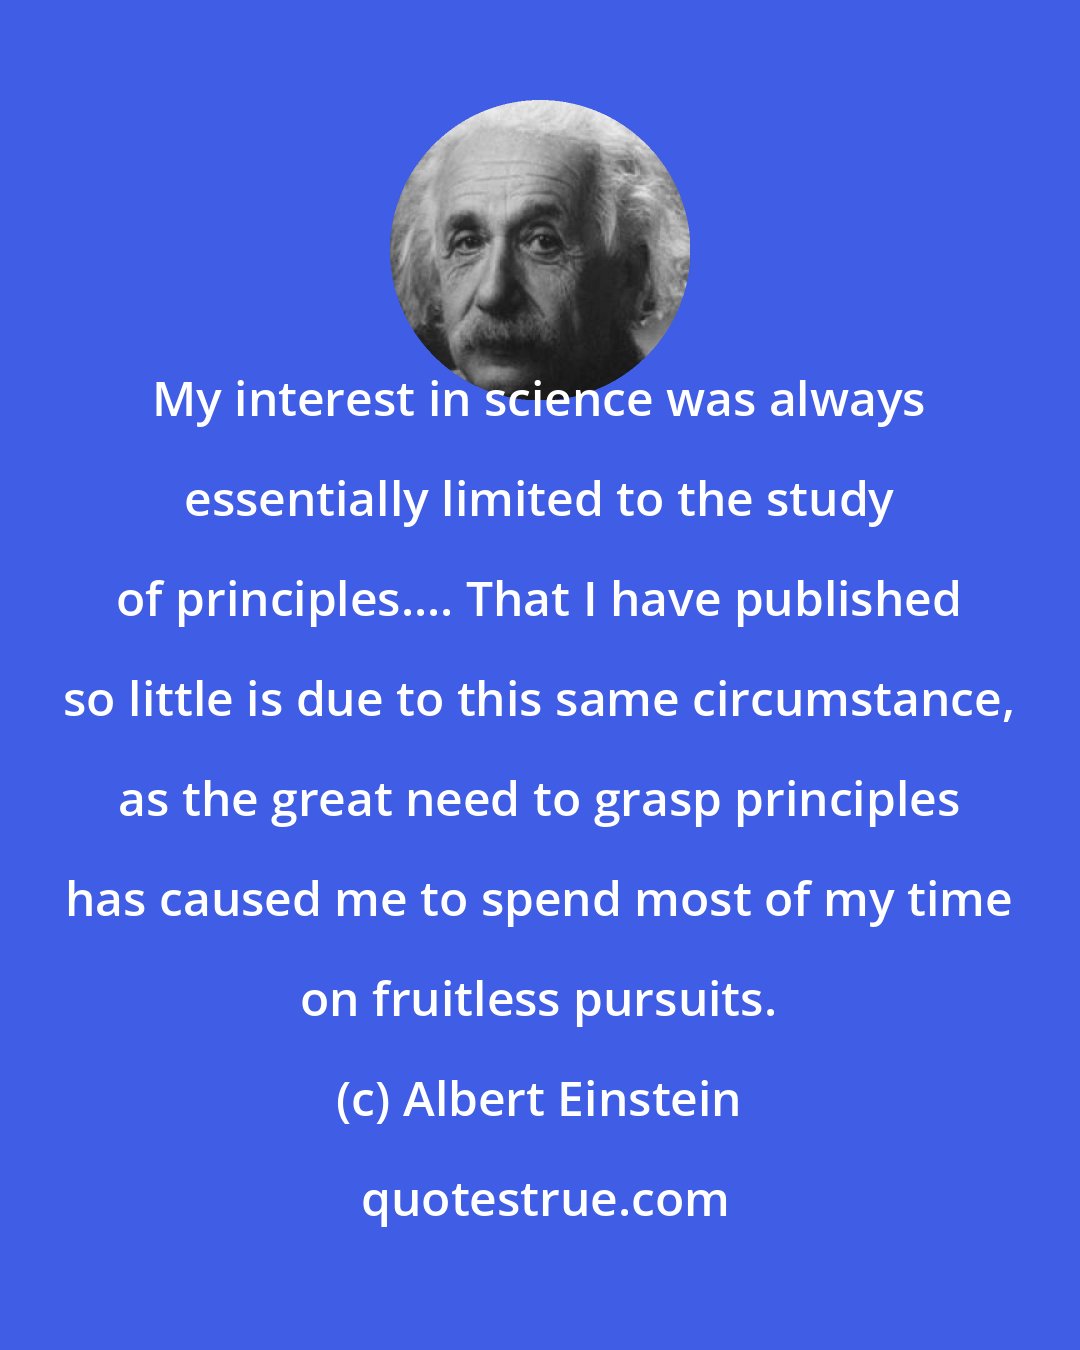 Albert Einstein: My interest in science was always essentially limited to the study of principles.... That I have published so little is due to this same circumstance, as the great need to grasp principles has caused me to spend most of my time on fruitless pursuits.